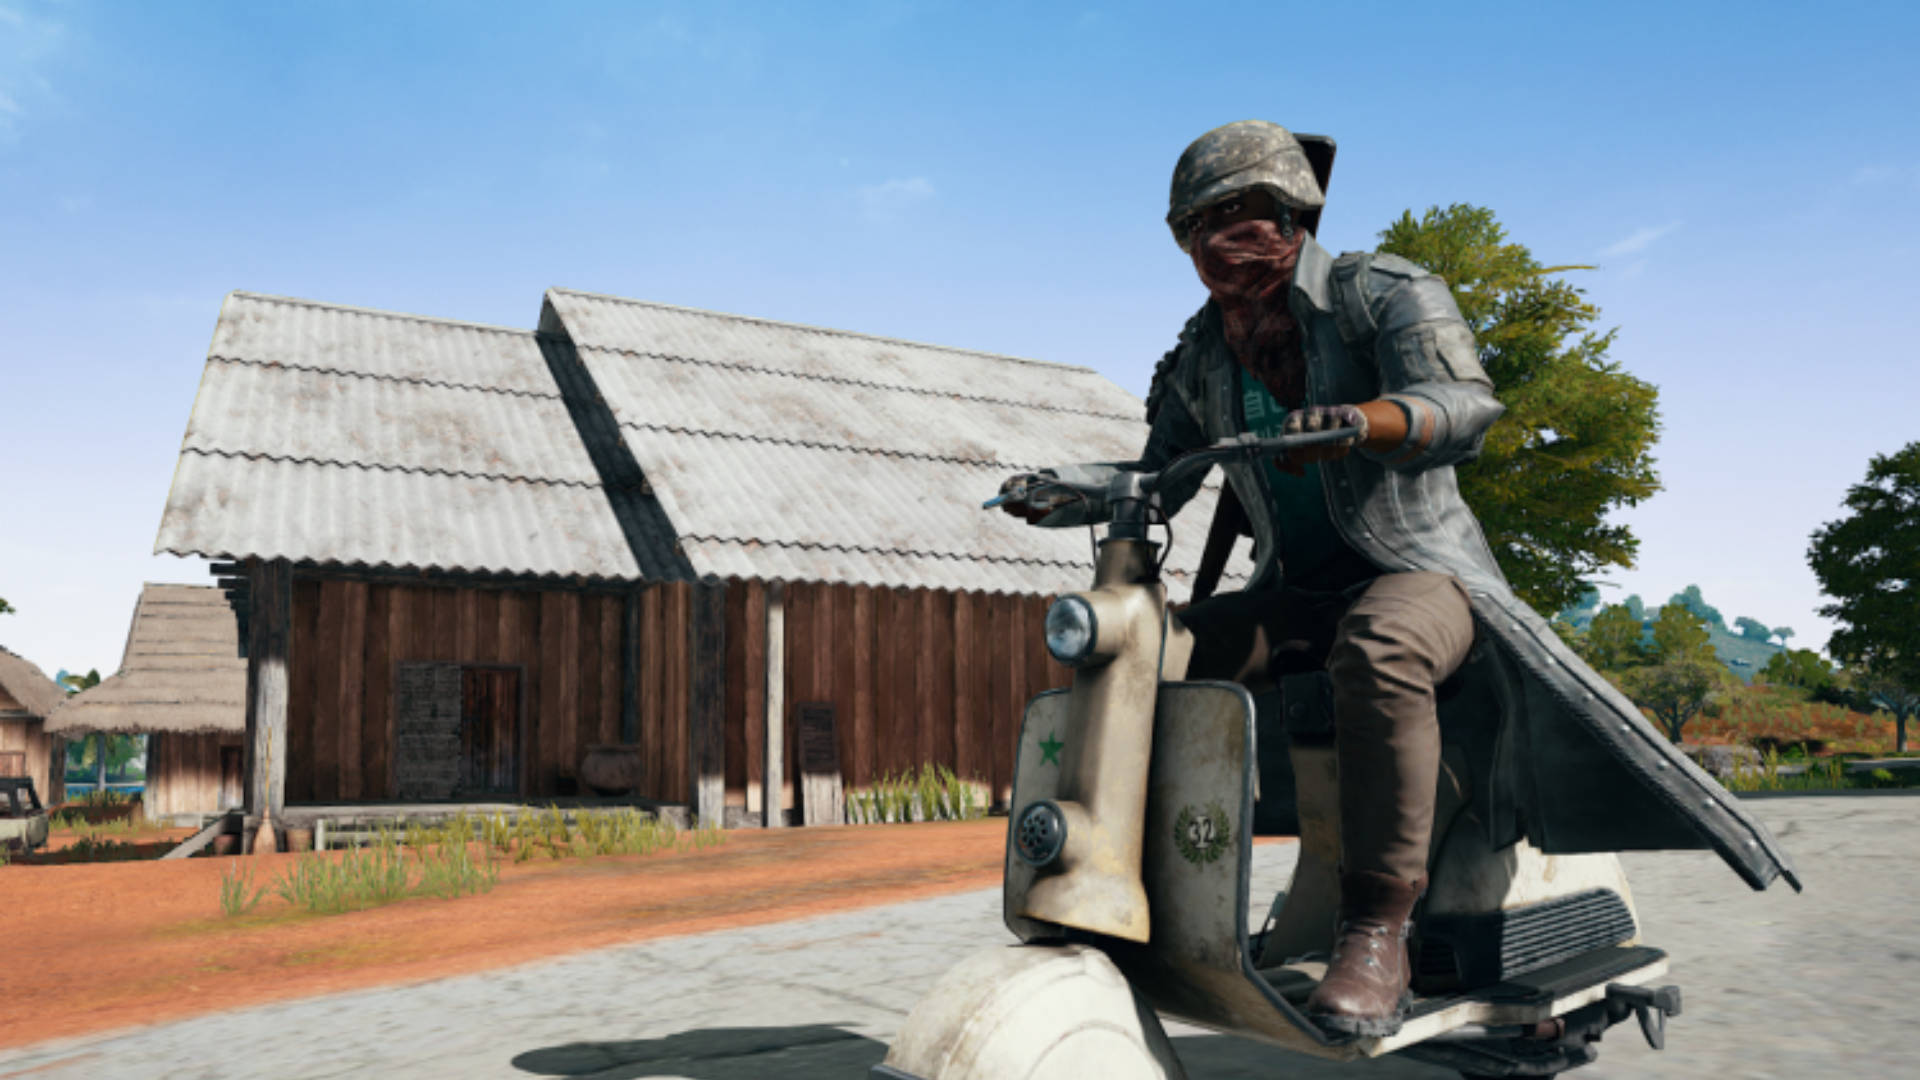 Pubg Season 3 Player Riding The Scooter Background